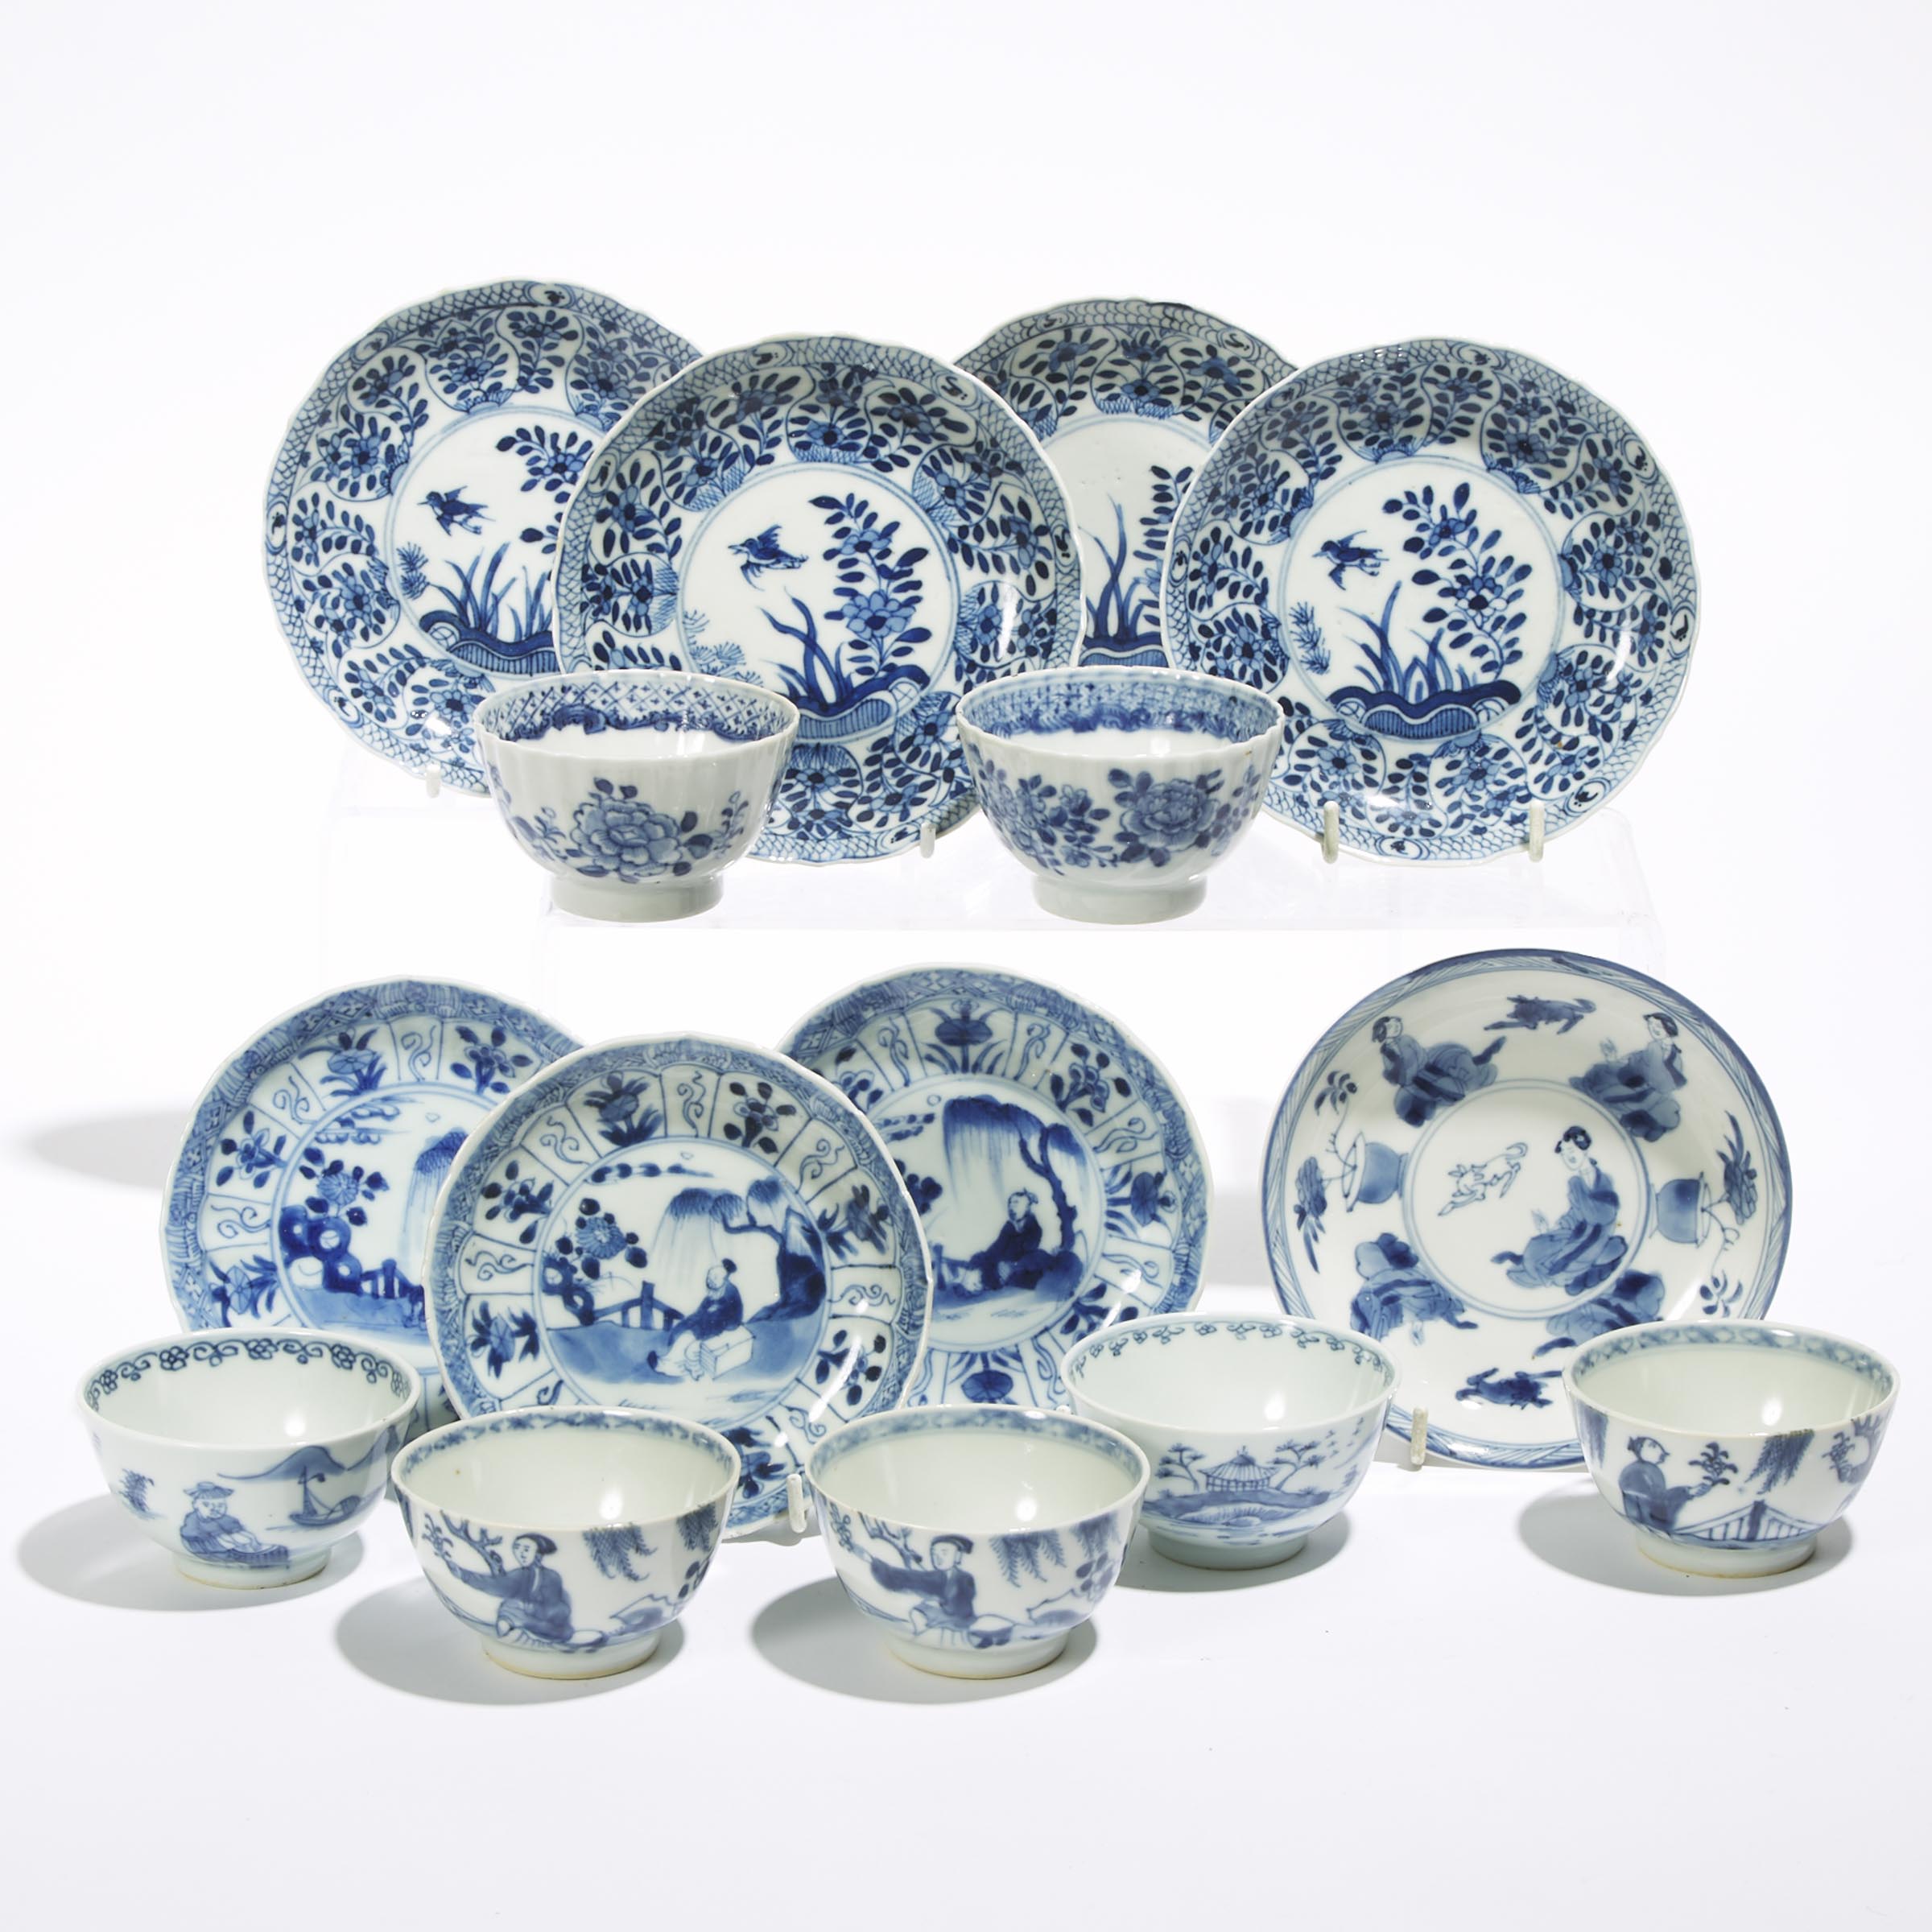 A Group of Fifteen Blue and White Cups and Saucers, Kangxi Period (1662-1722)